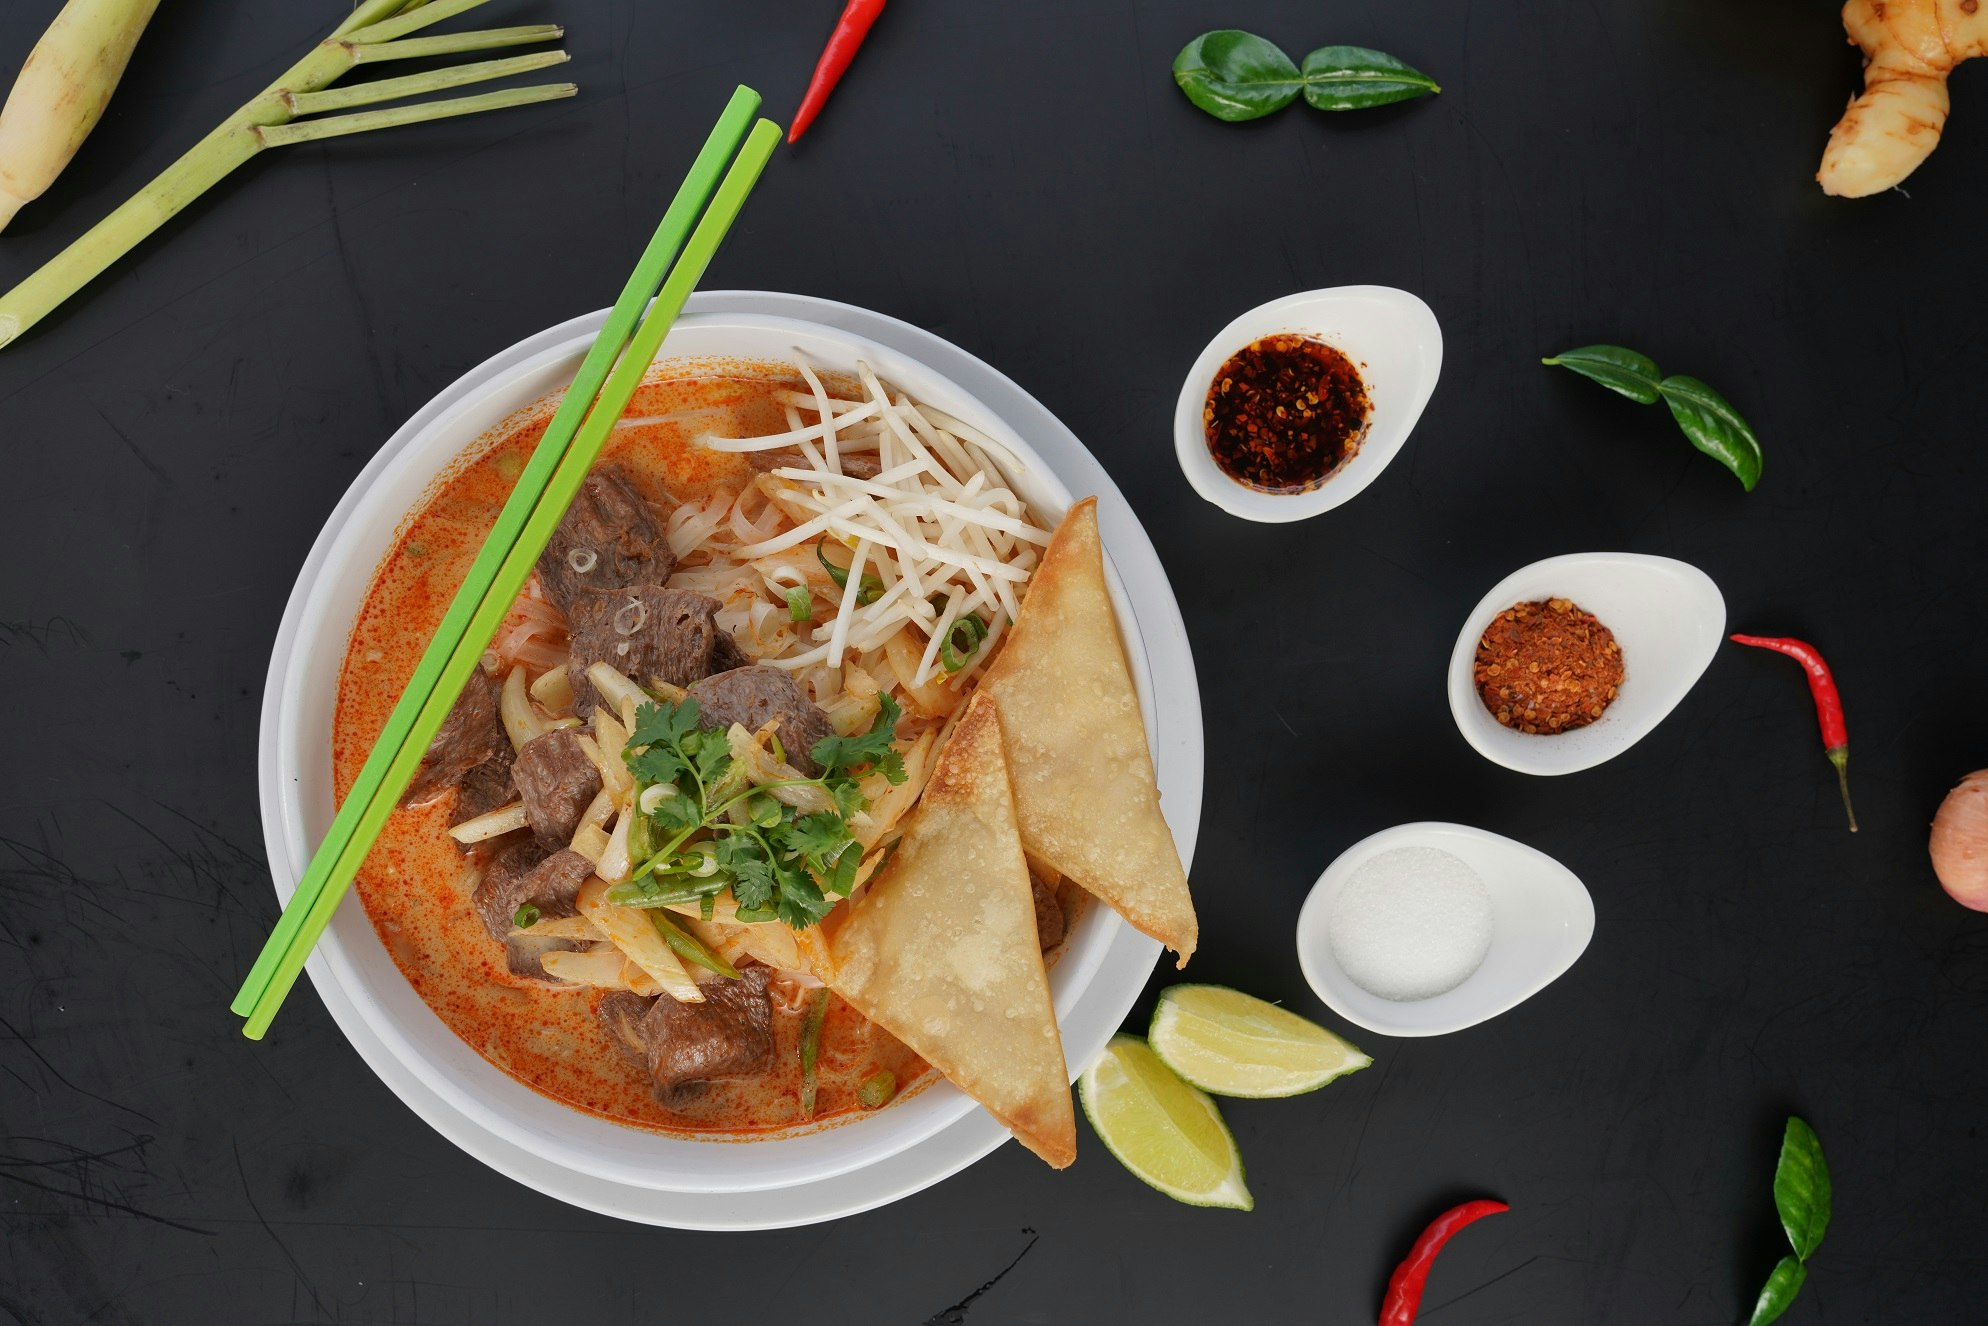 Overhead view of a spicy vegan noodle dish. There are a pair of chopsticks positioned across the side the bowl. There are spices and sauces placed around the bowl; LA vegan restaurants 